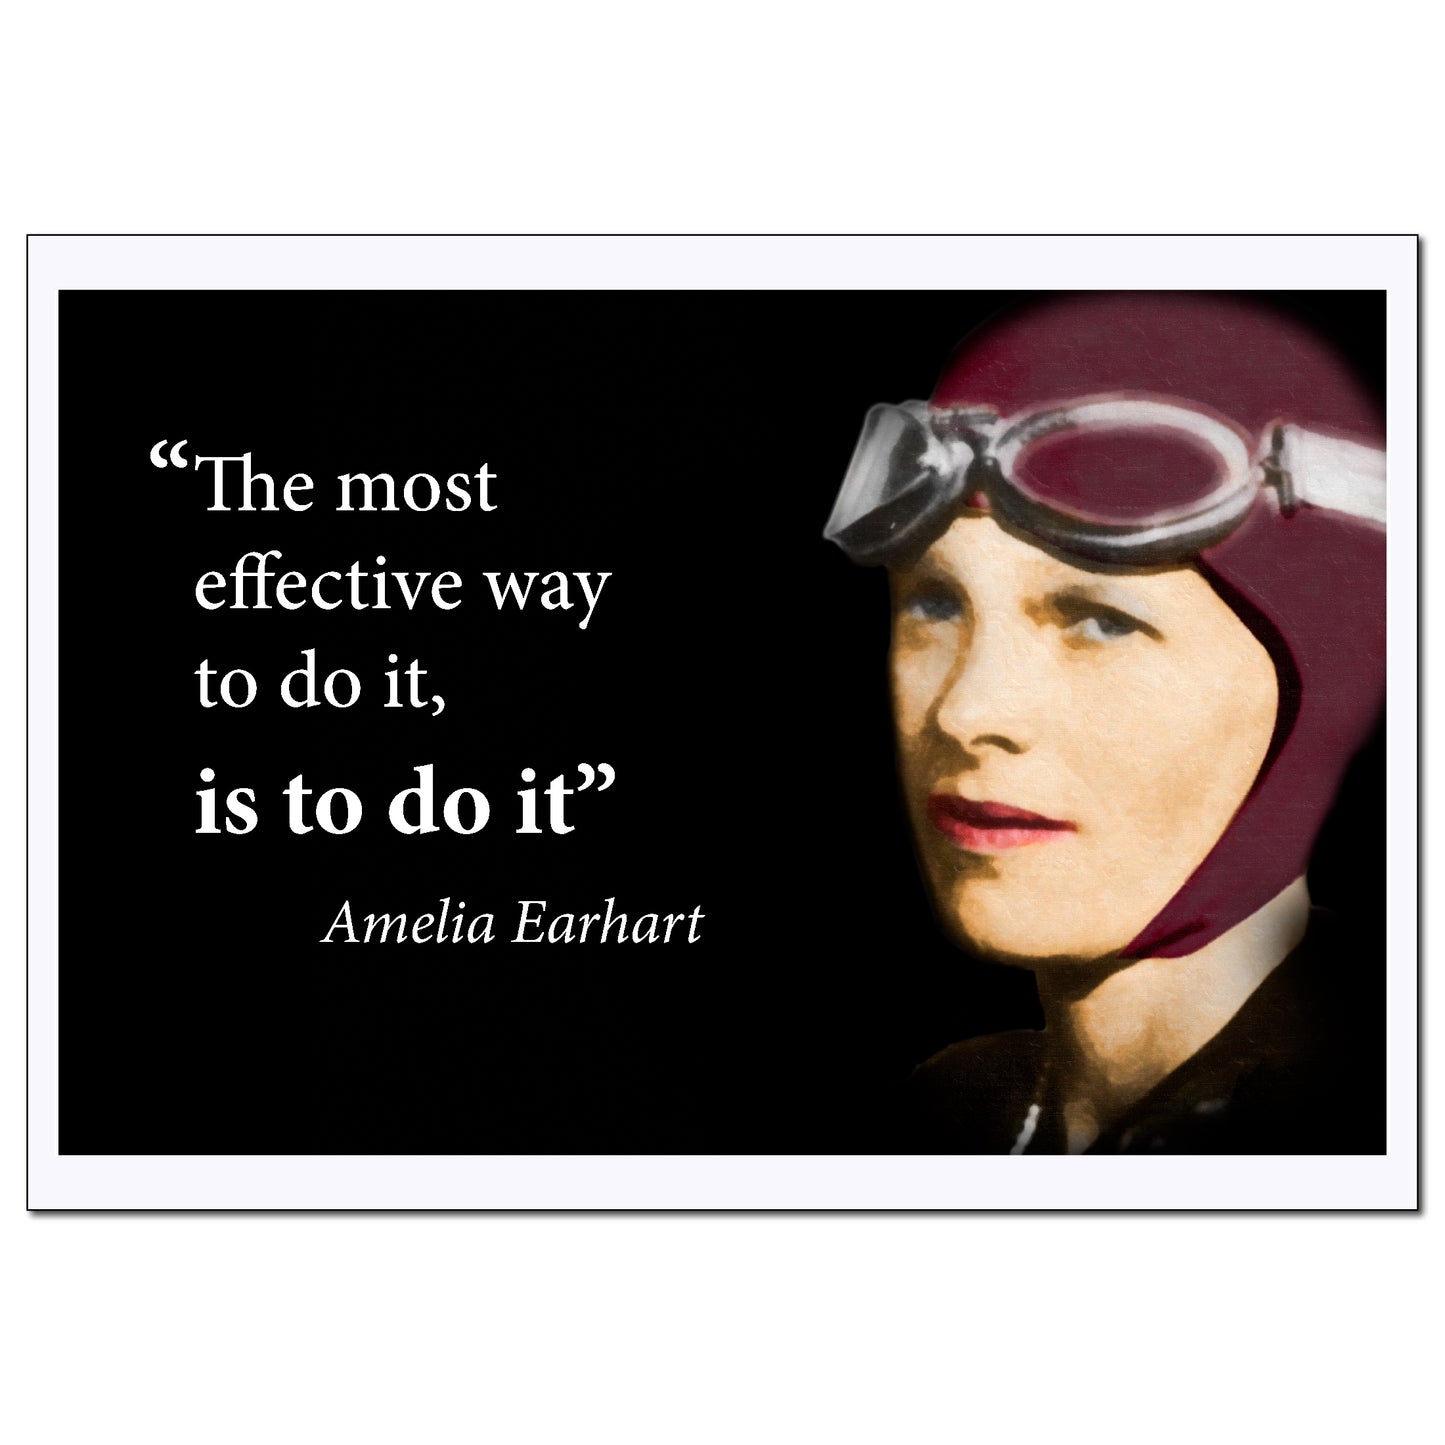 Amelia Earhart Inspirational Women Poster Quote - Young N Refined